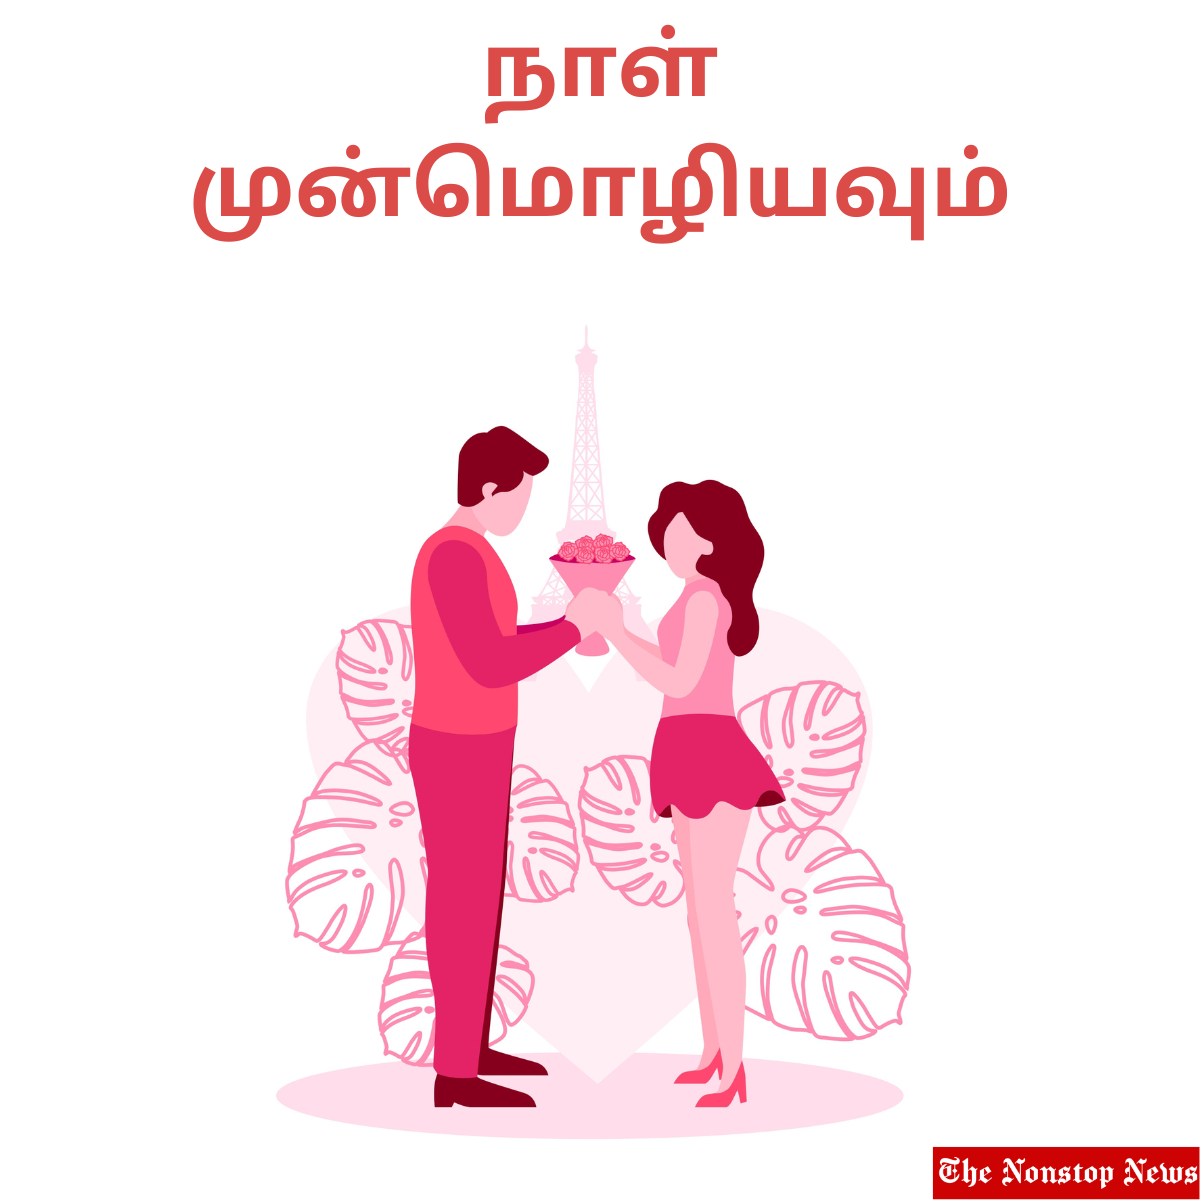 Happy Propose Day 2023 Greetings in Tamil: Shayari, Wishes, Images, Messages, Quotes, and WhatsApp Status Video